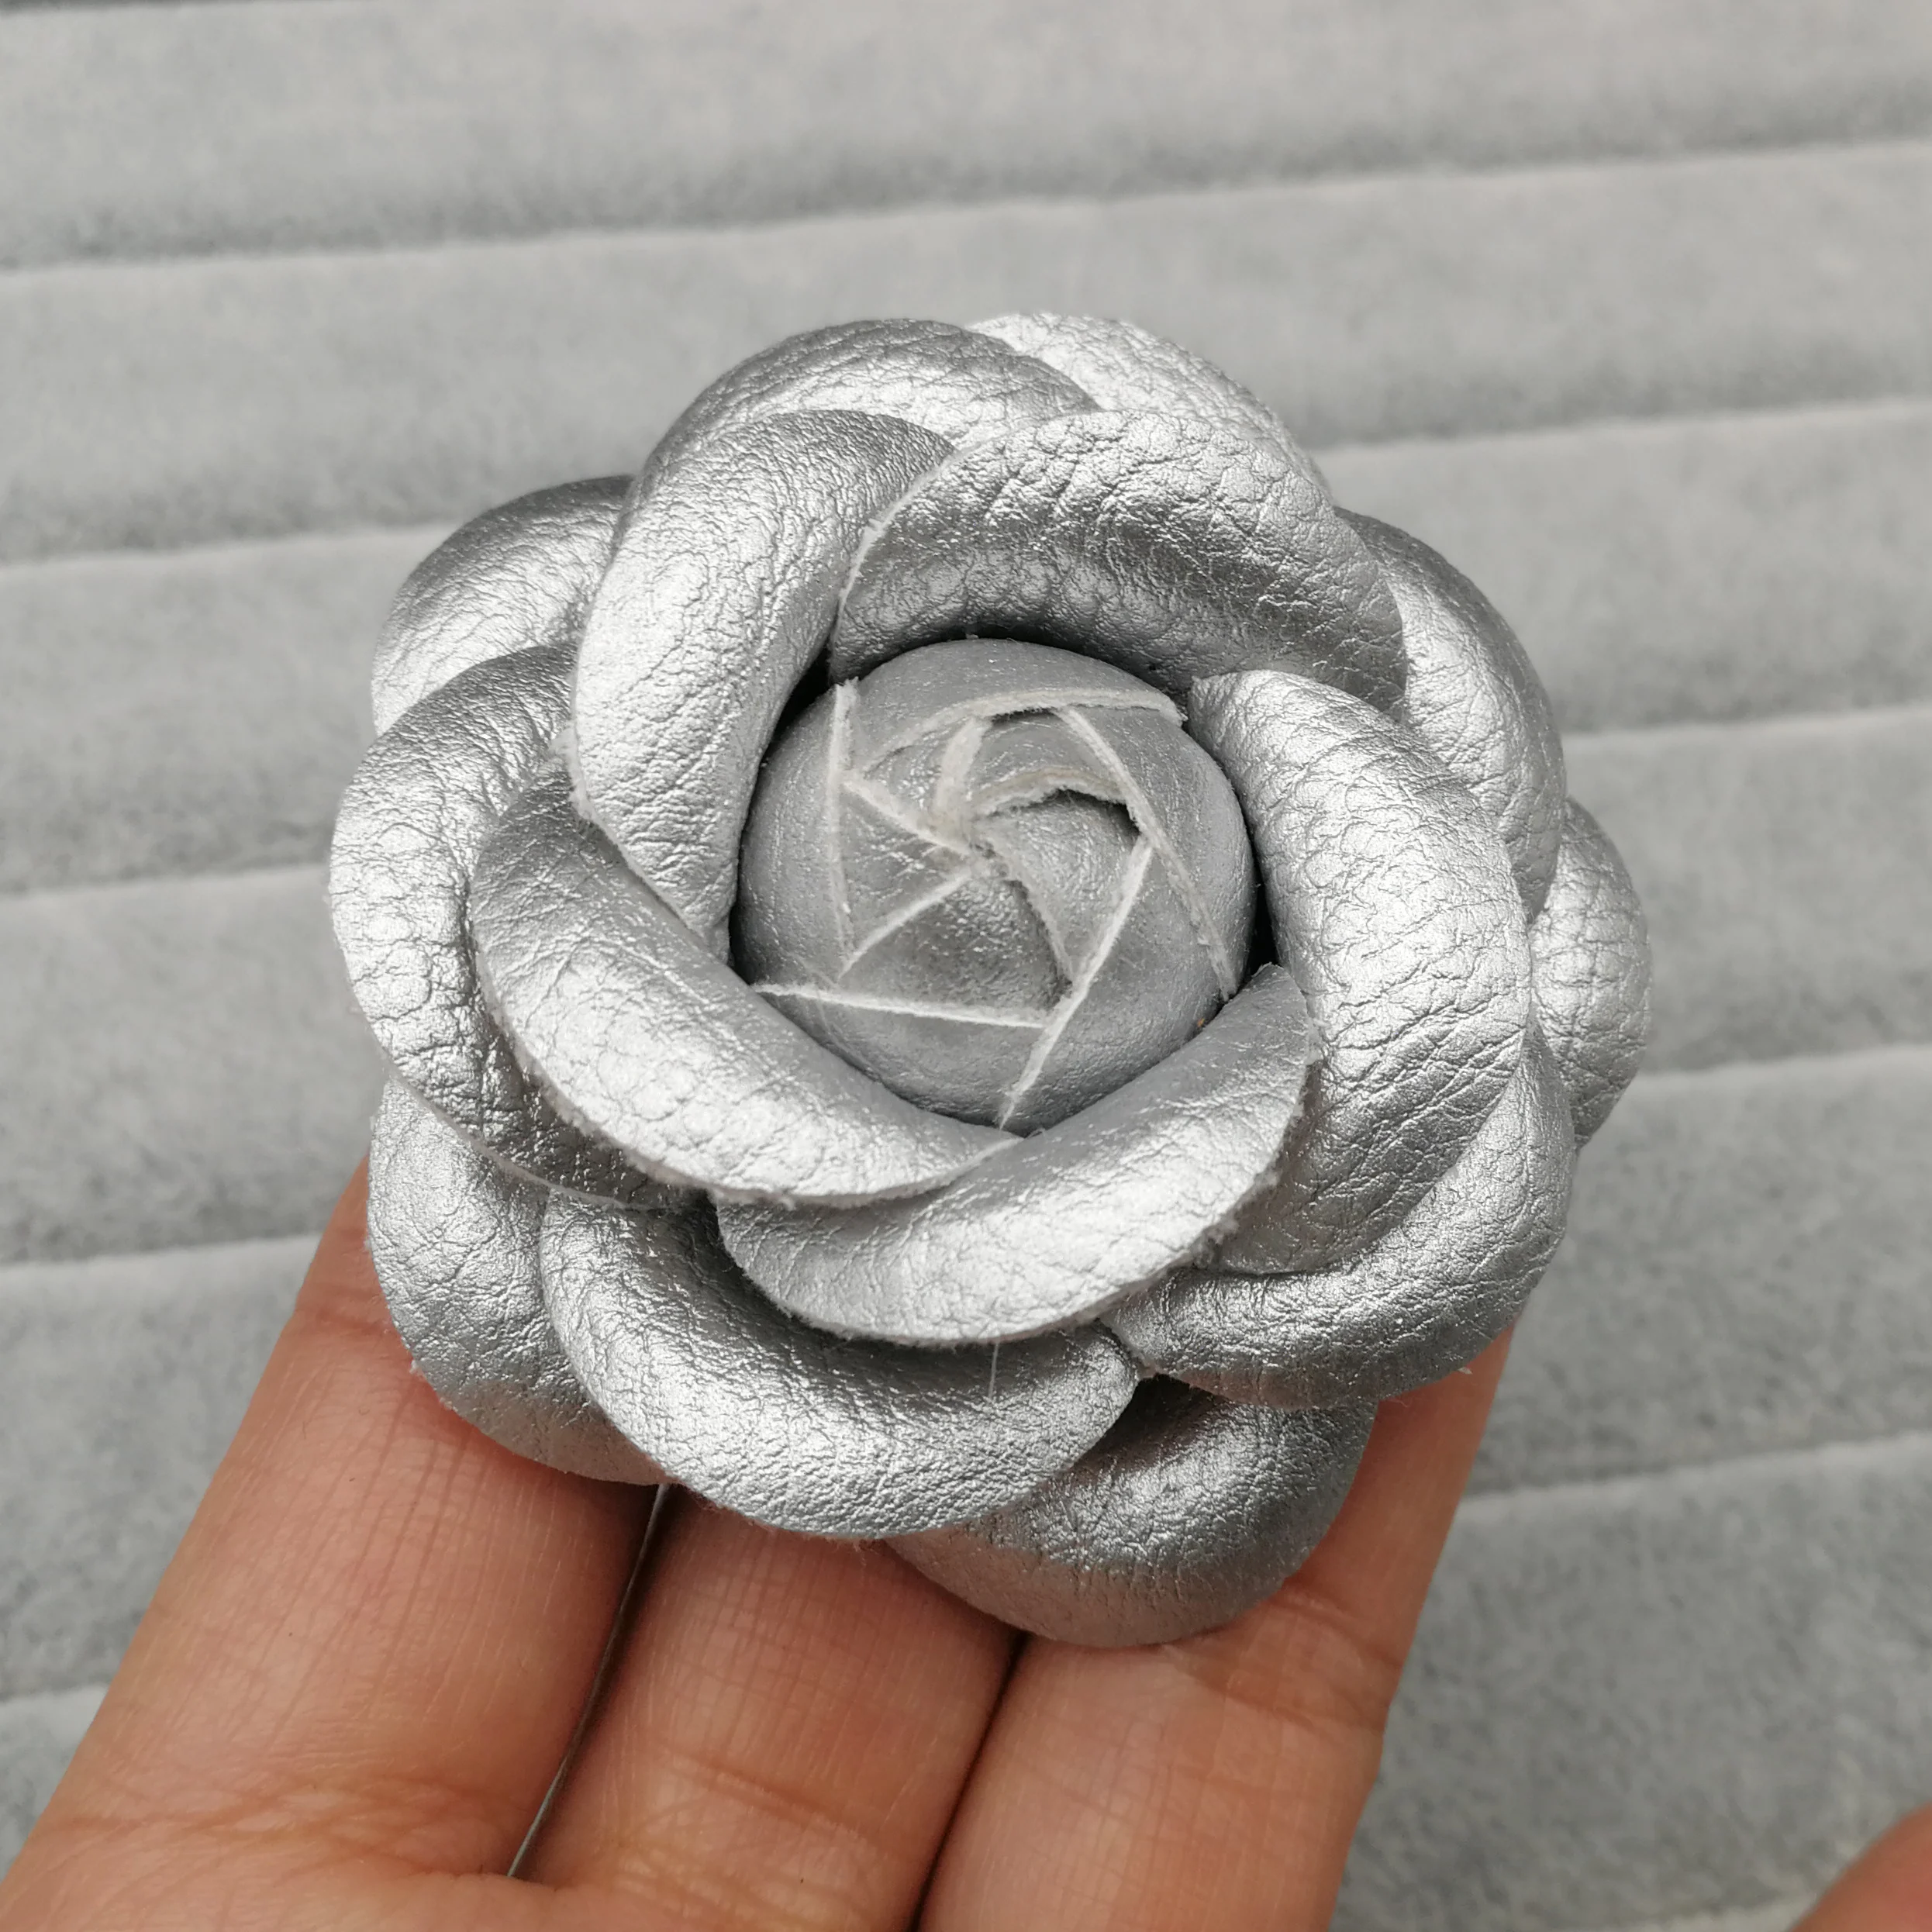 Details about   PU Leather Camellia Flower Jewelry Making Craft DIY Supplies Decoration Gift 